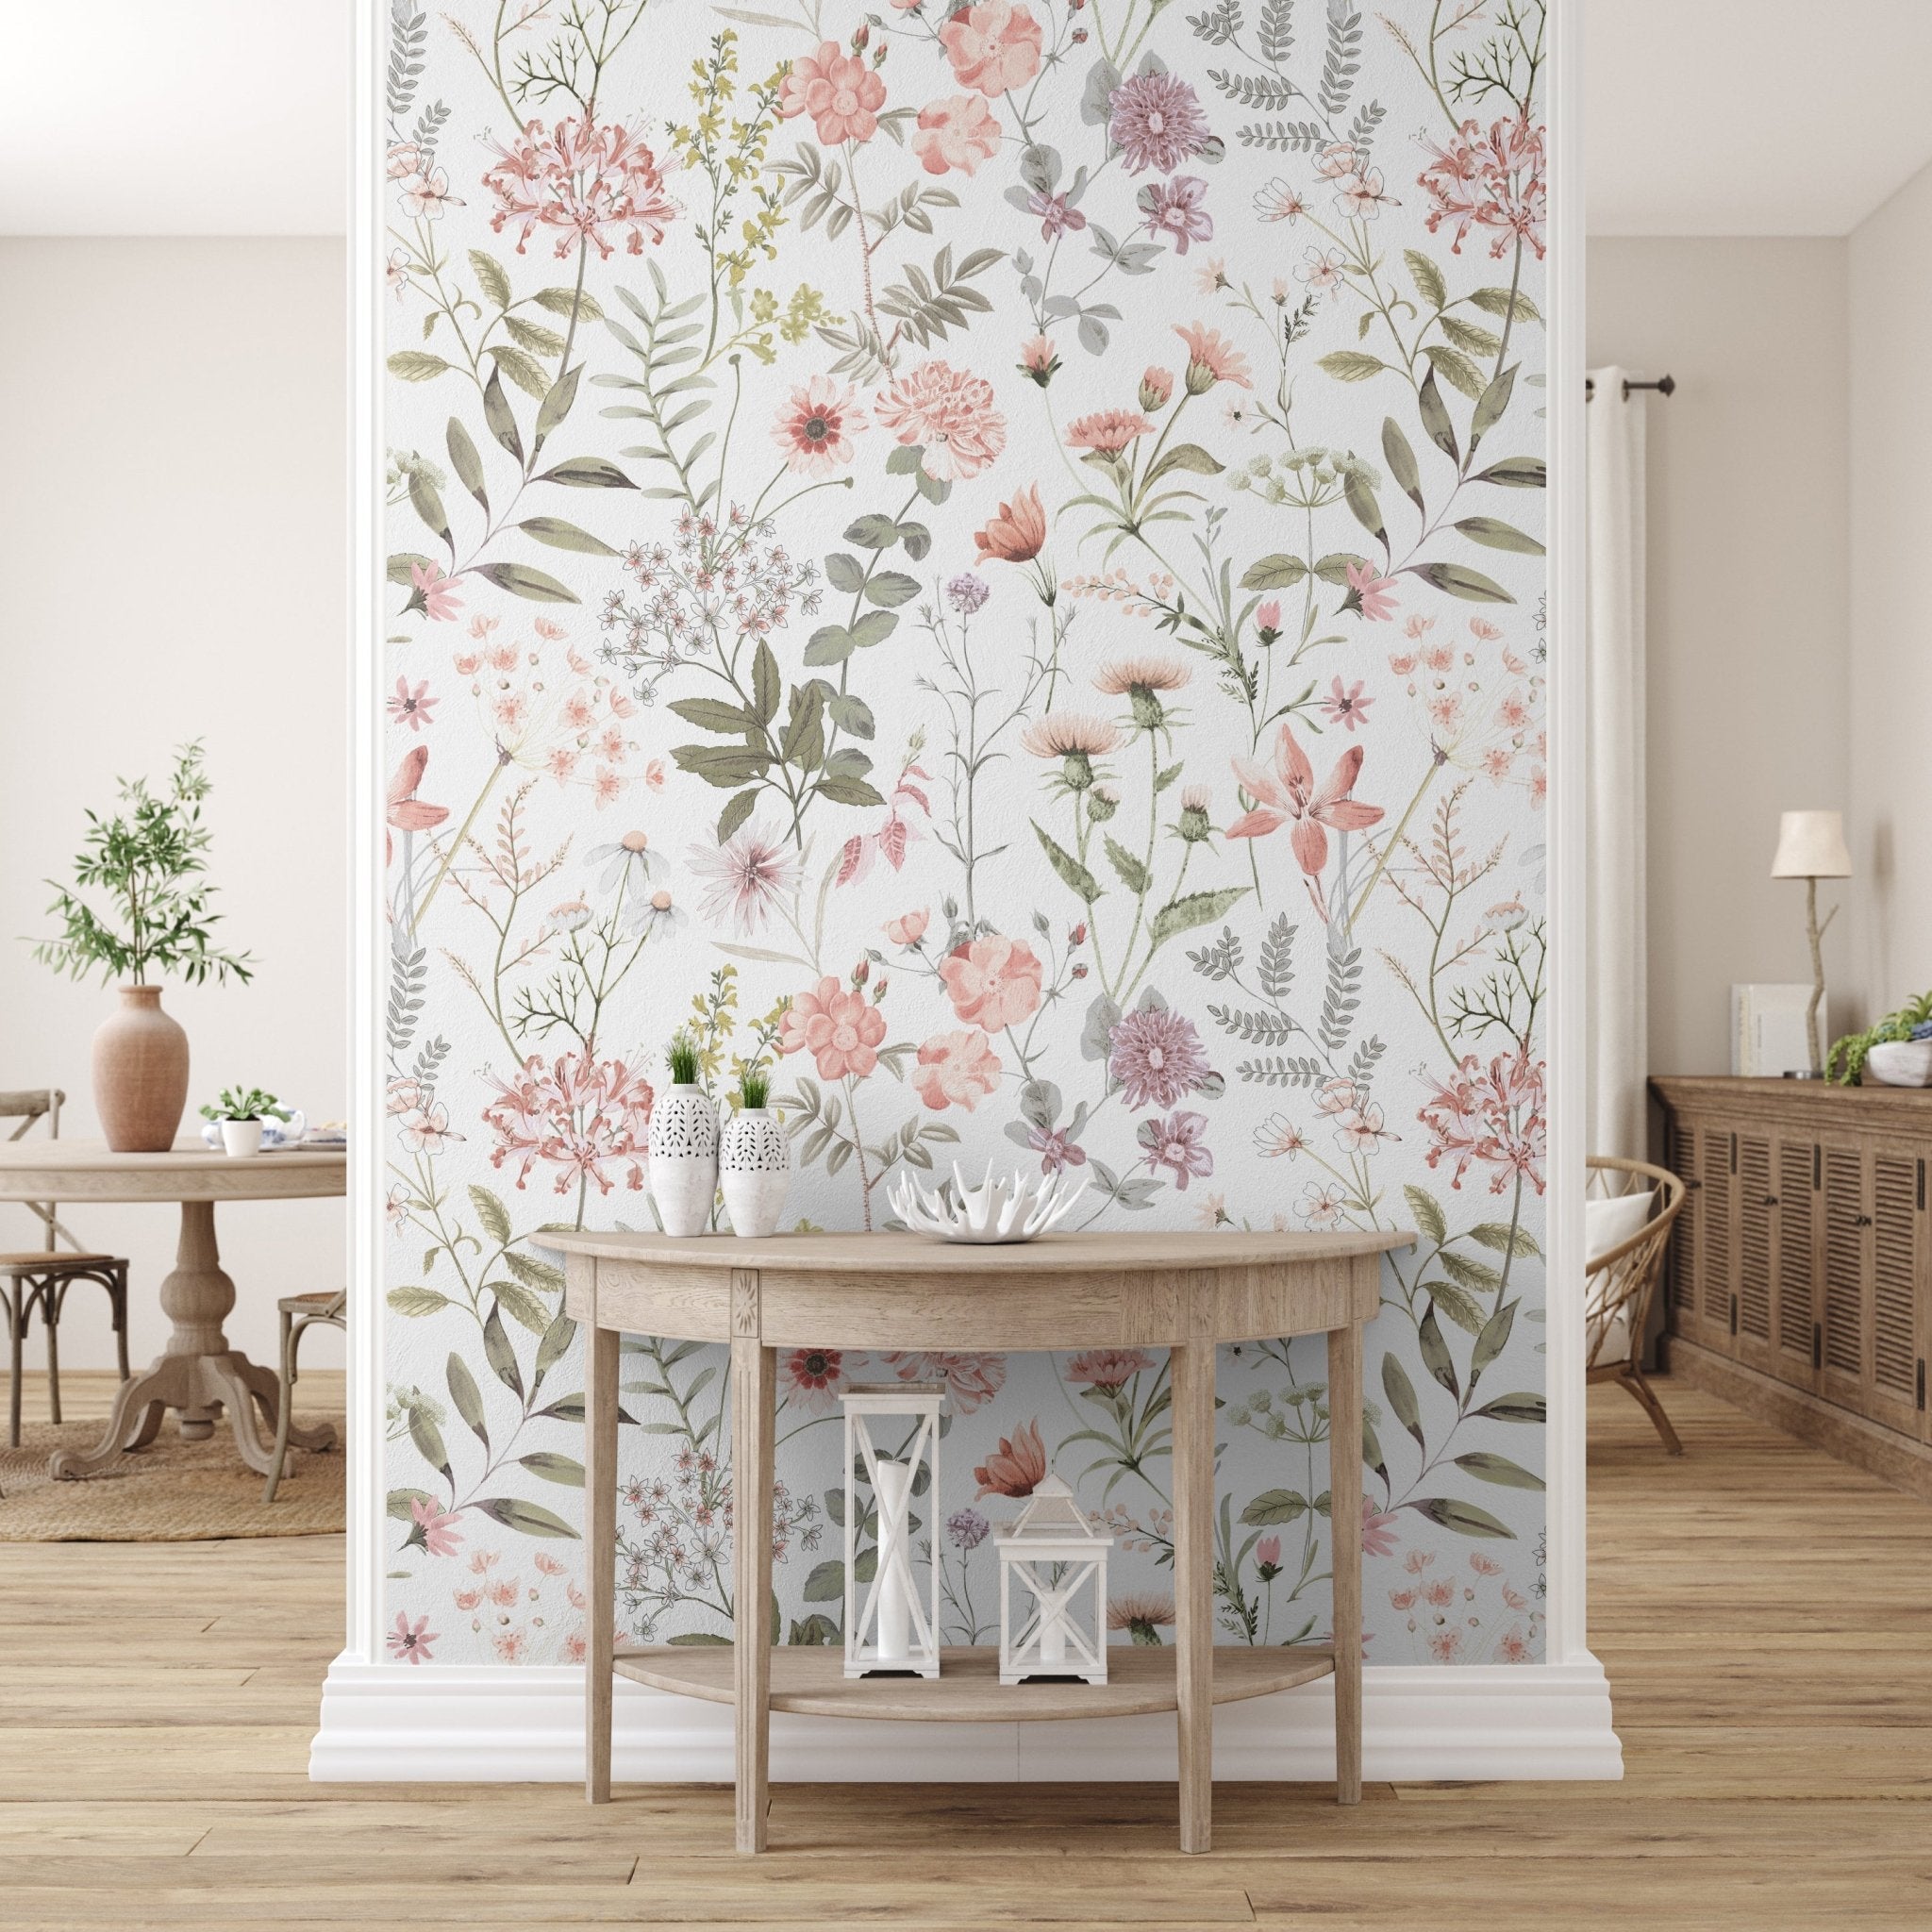 Cutout Floral Fabric, Wallpaper and Home Decor